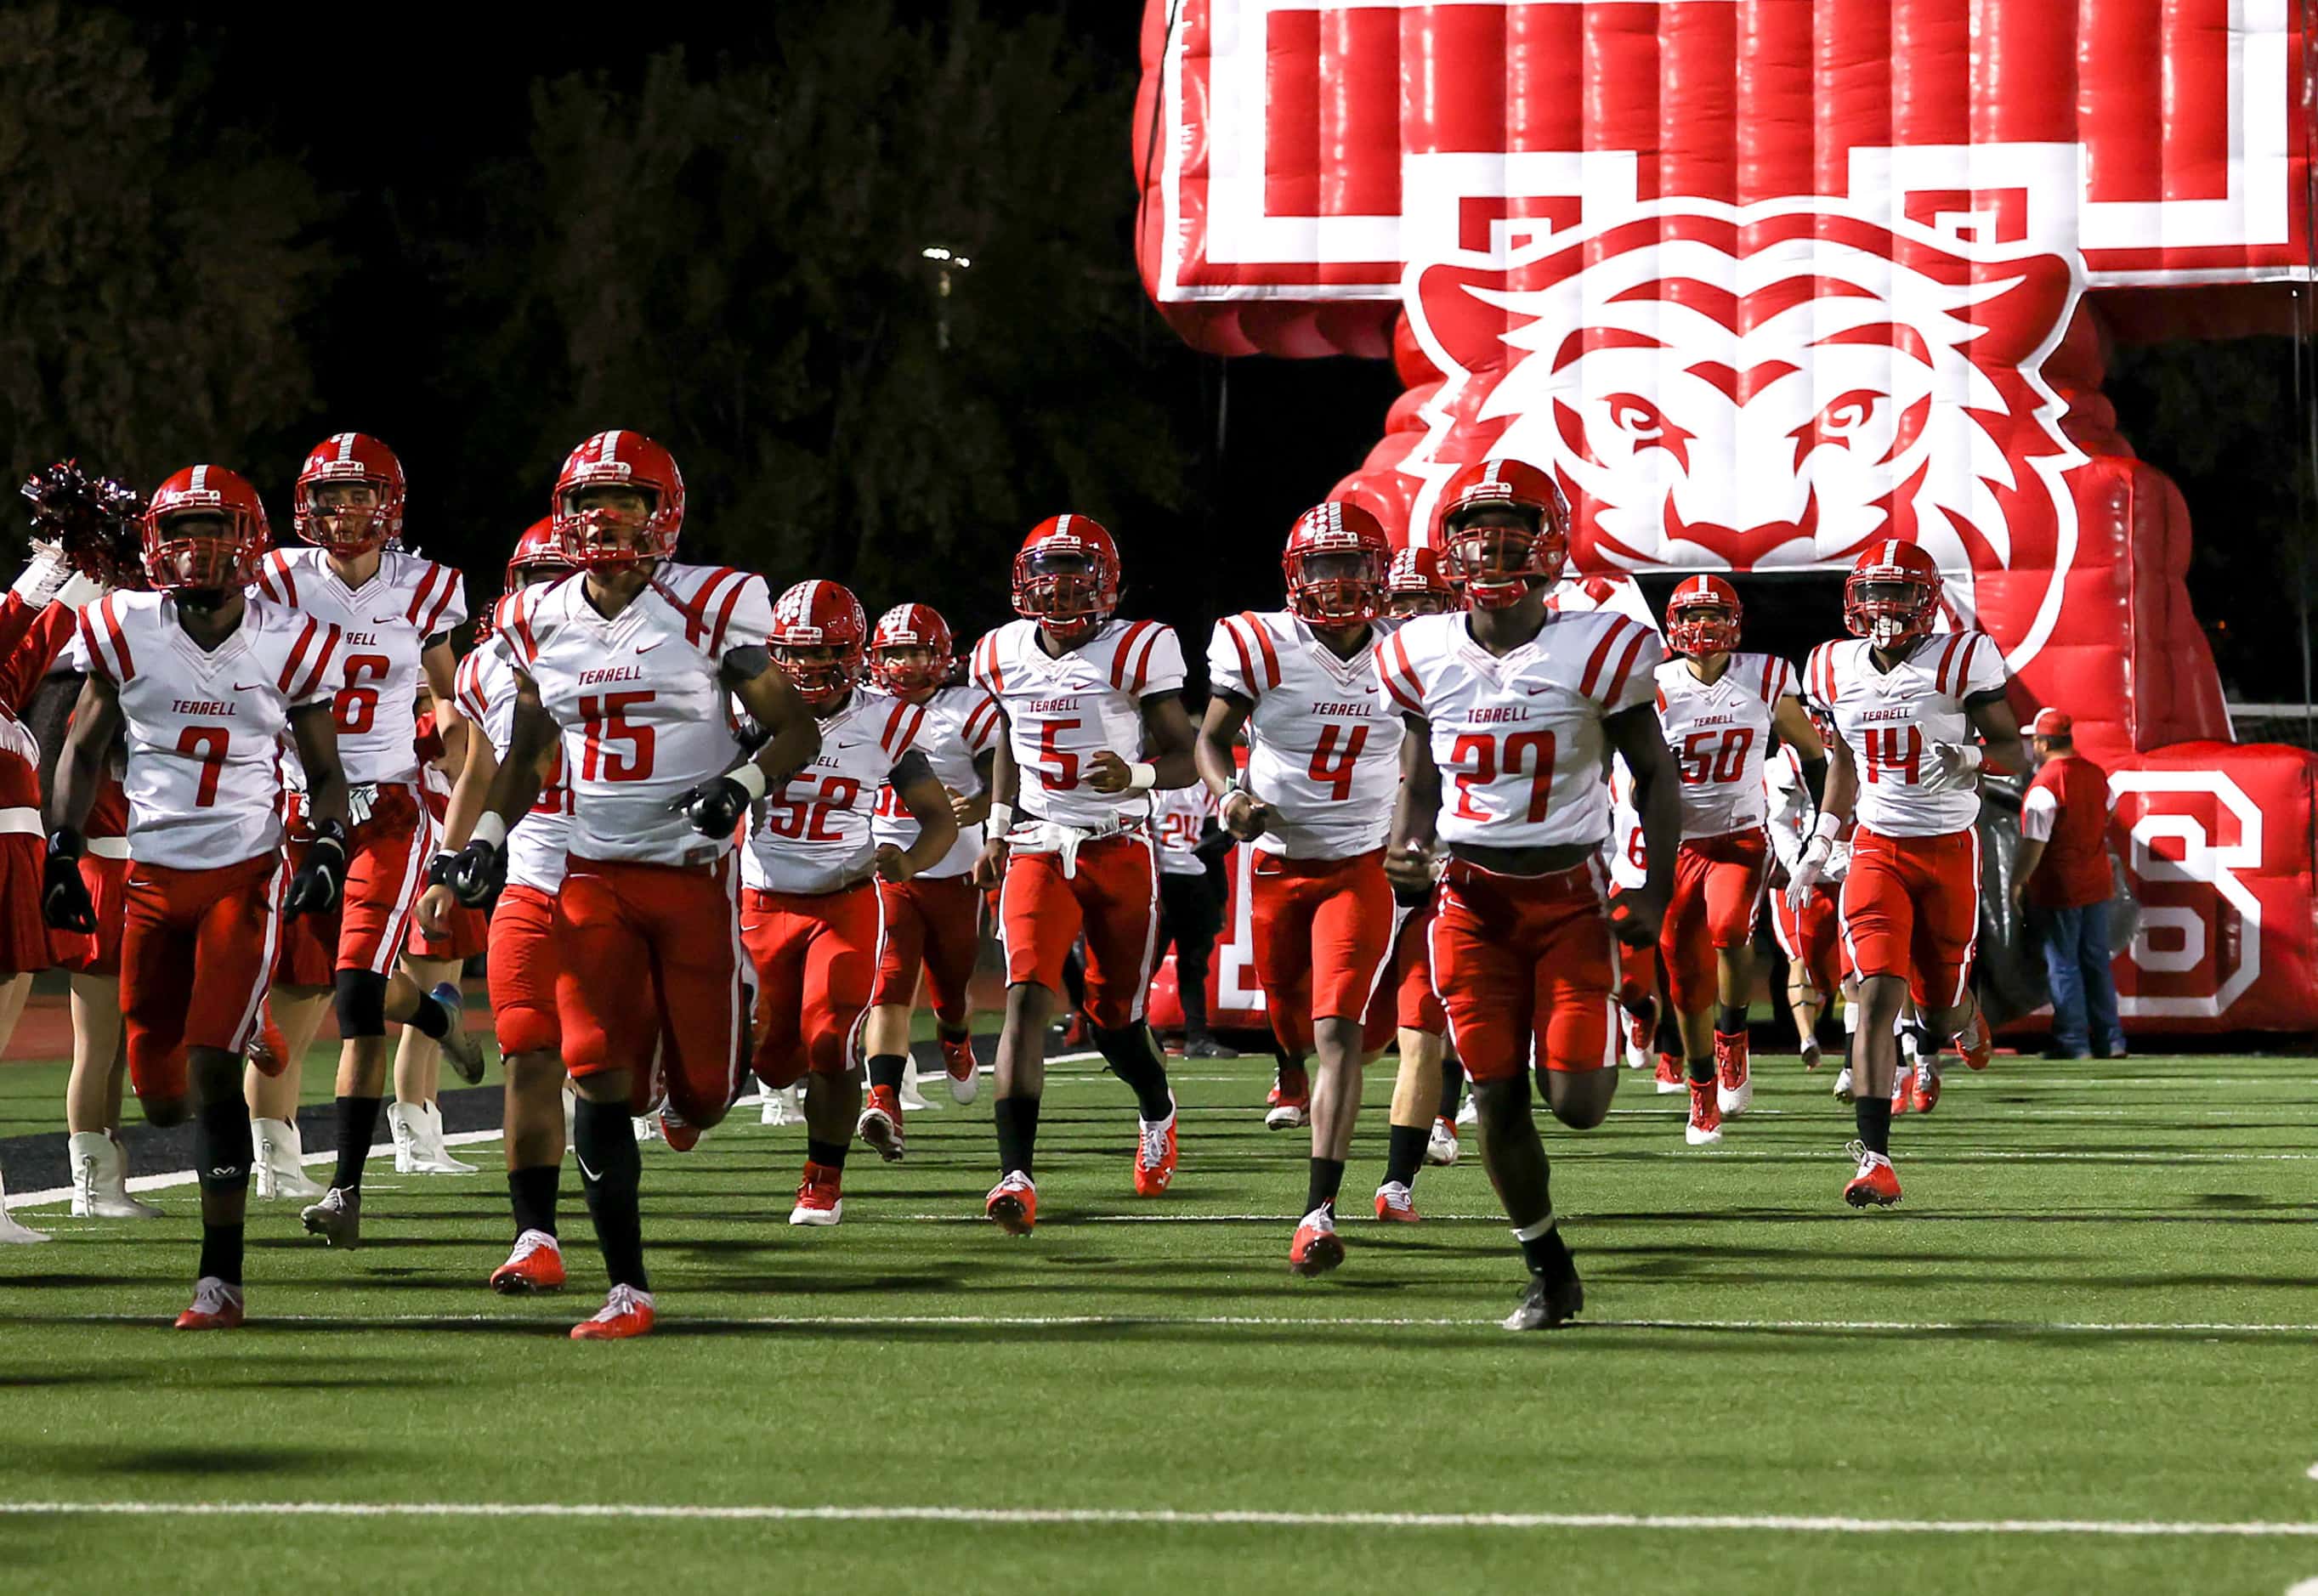 The Terrell Fighting Tigers enter the field to face Argyle in a District 7-4A high school...